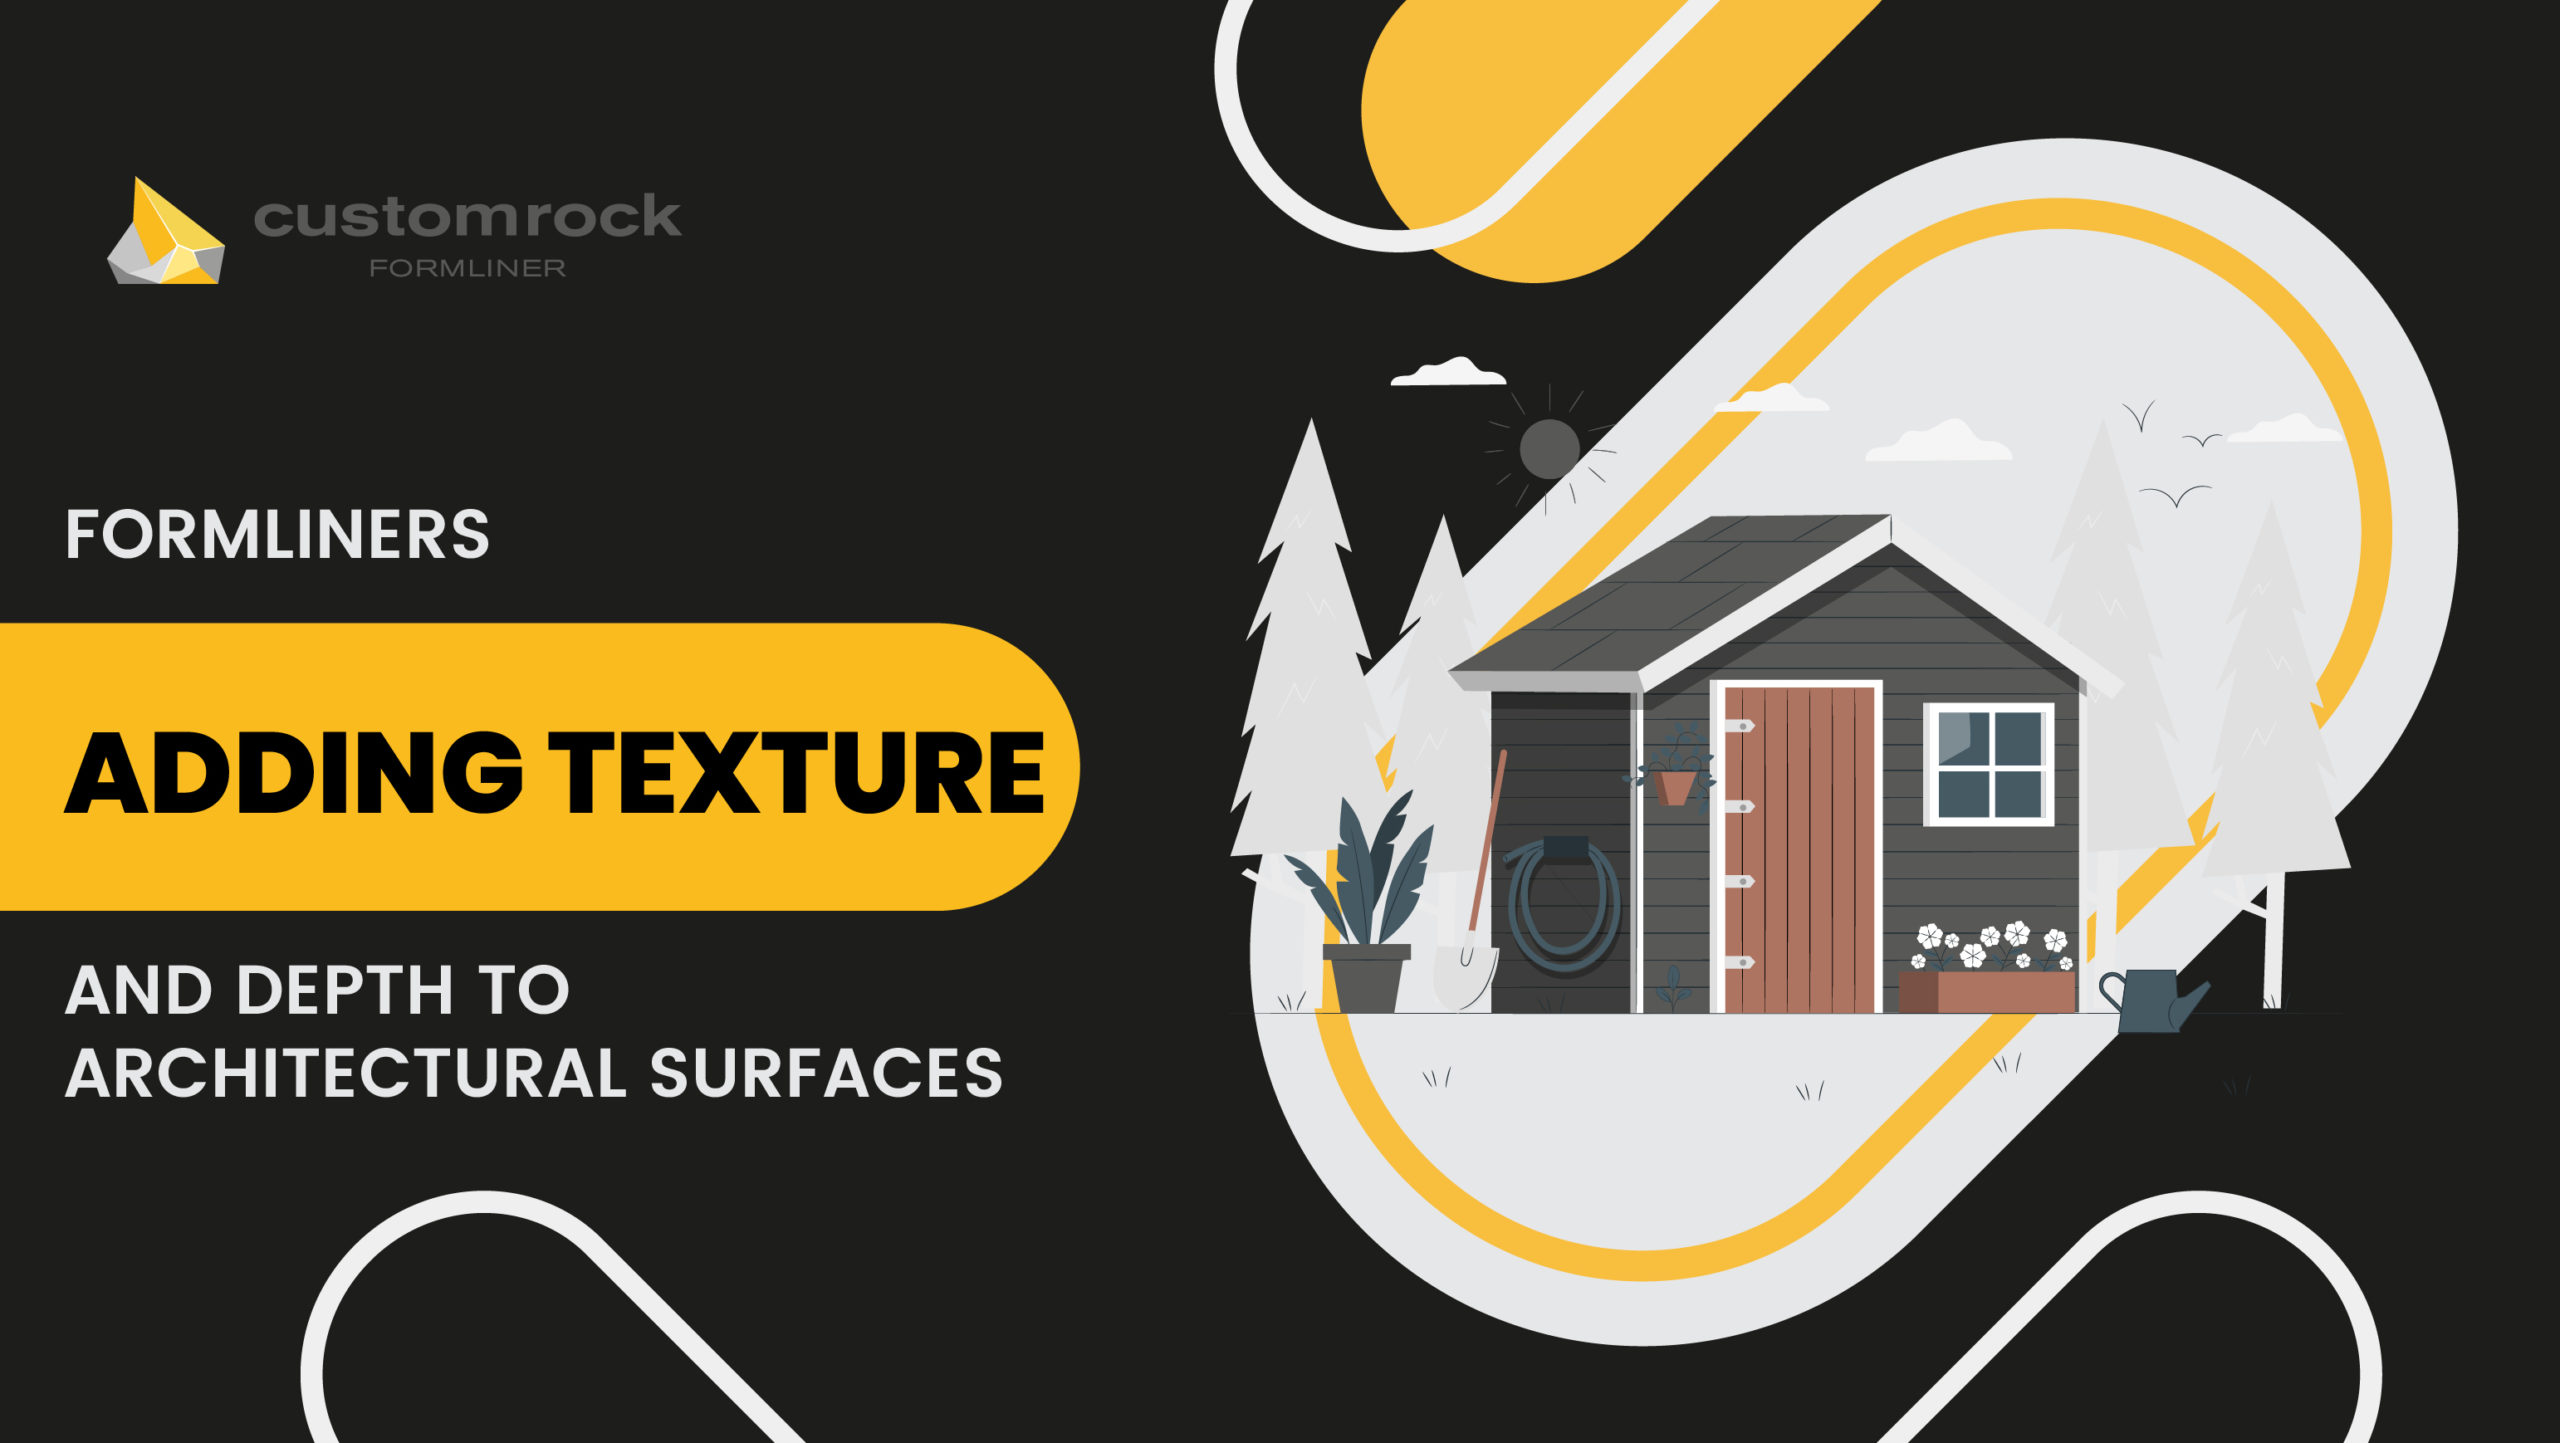 Formliners: Adding Texture and Depth to Architectural Surfaces